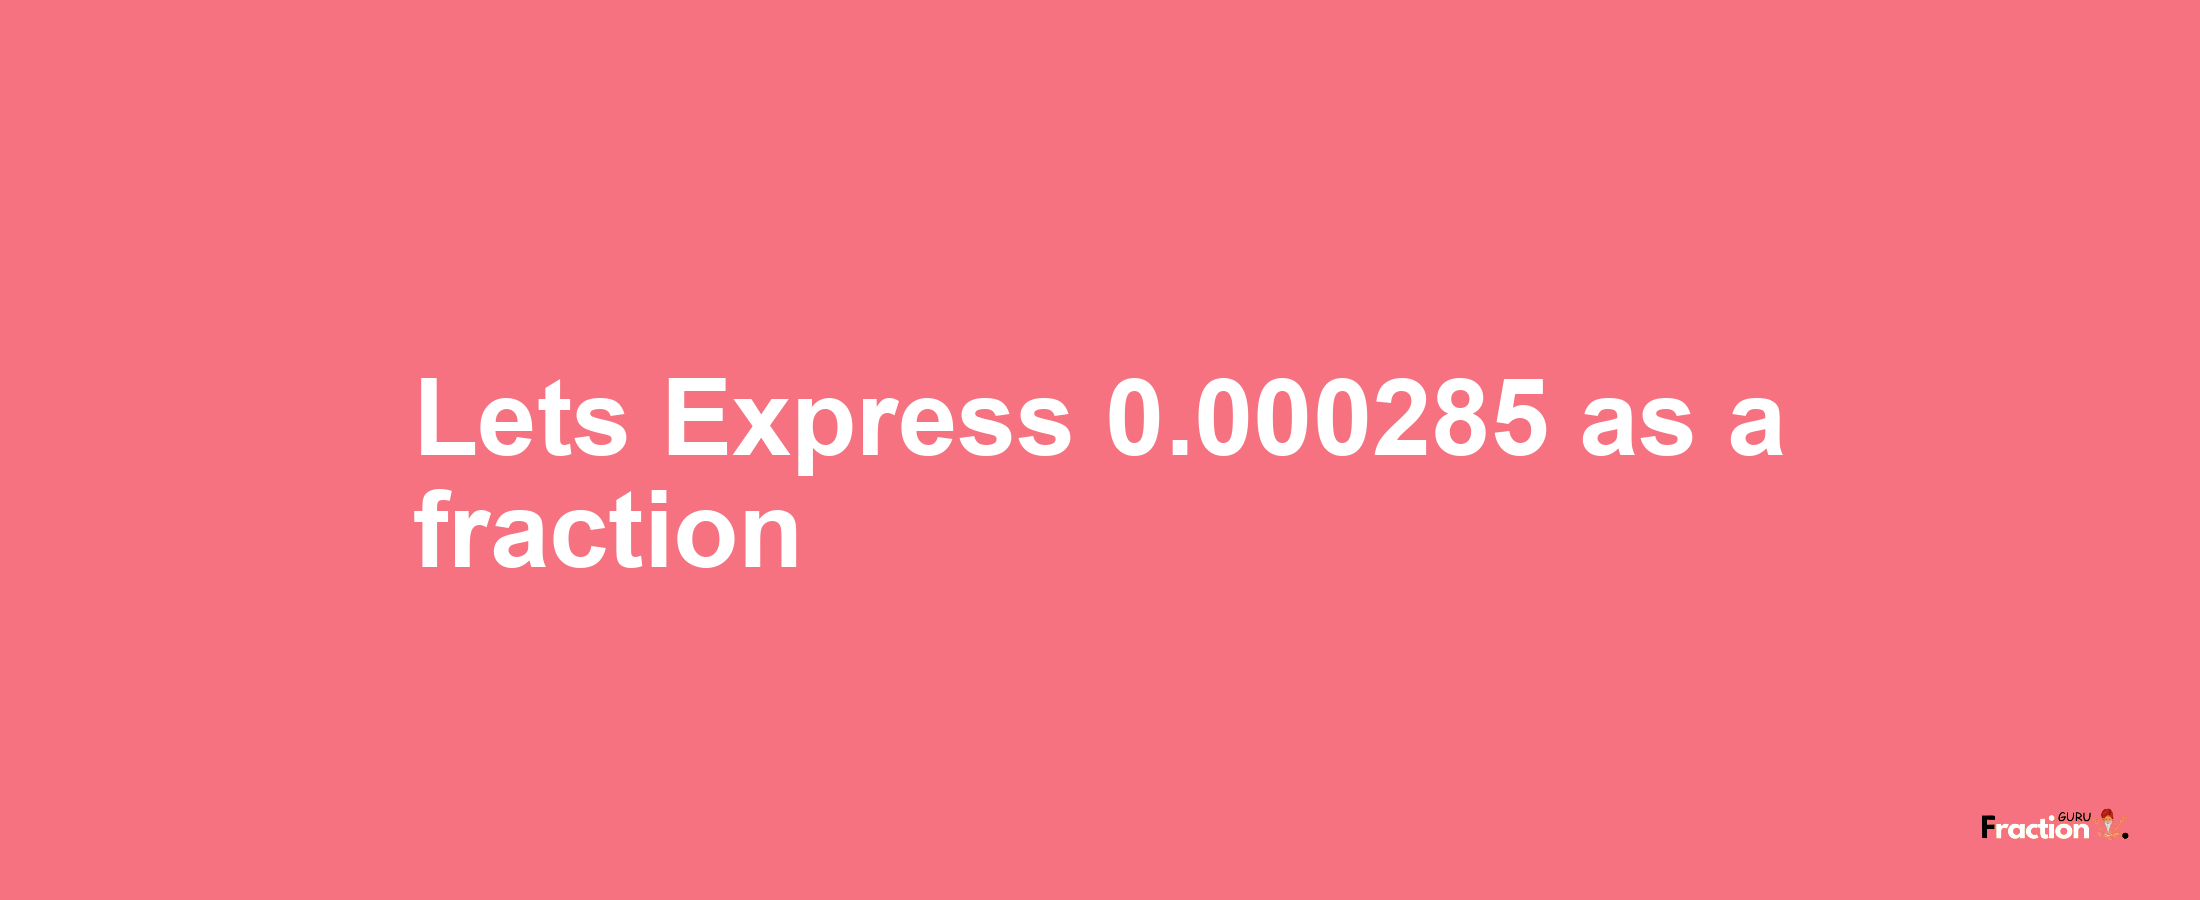 Lets Express 0.000285 as afraction